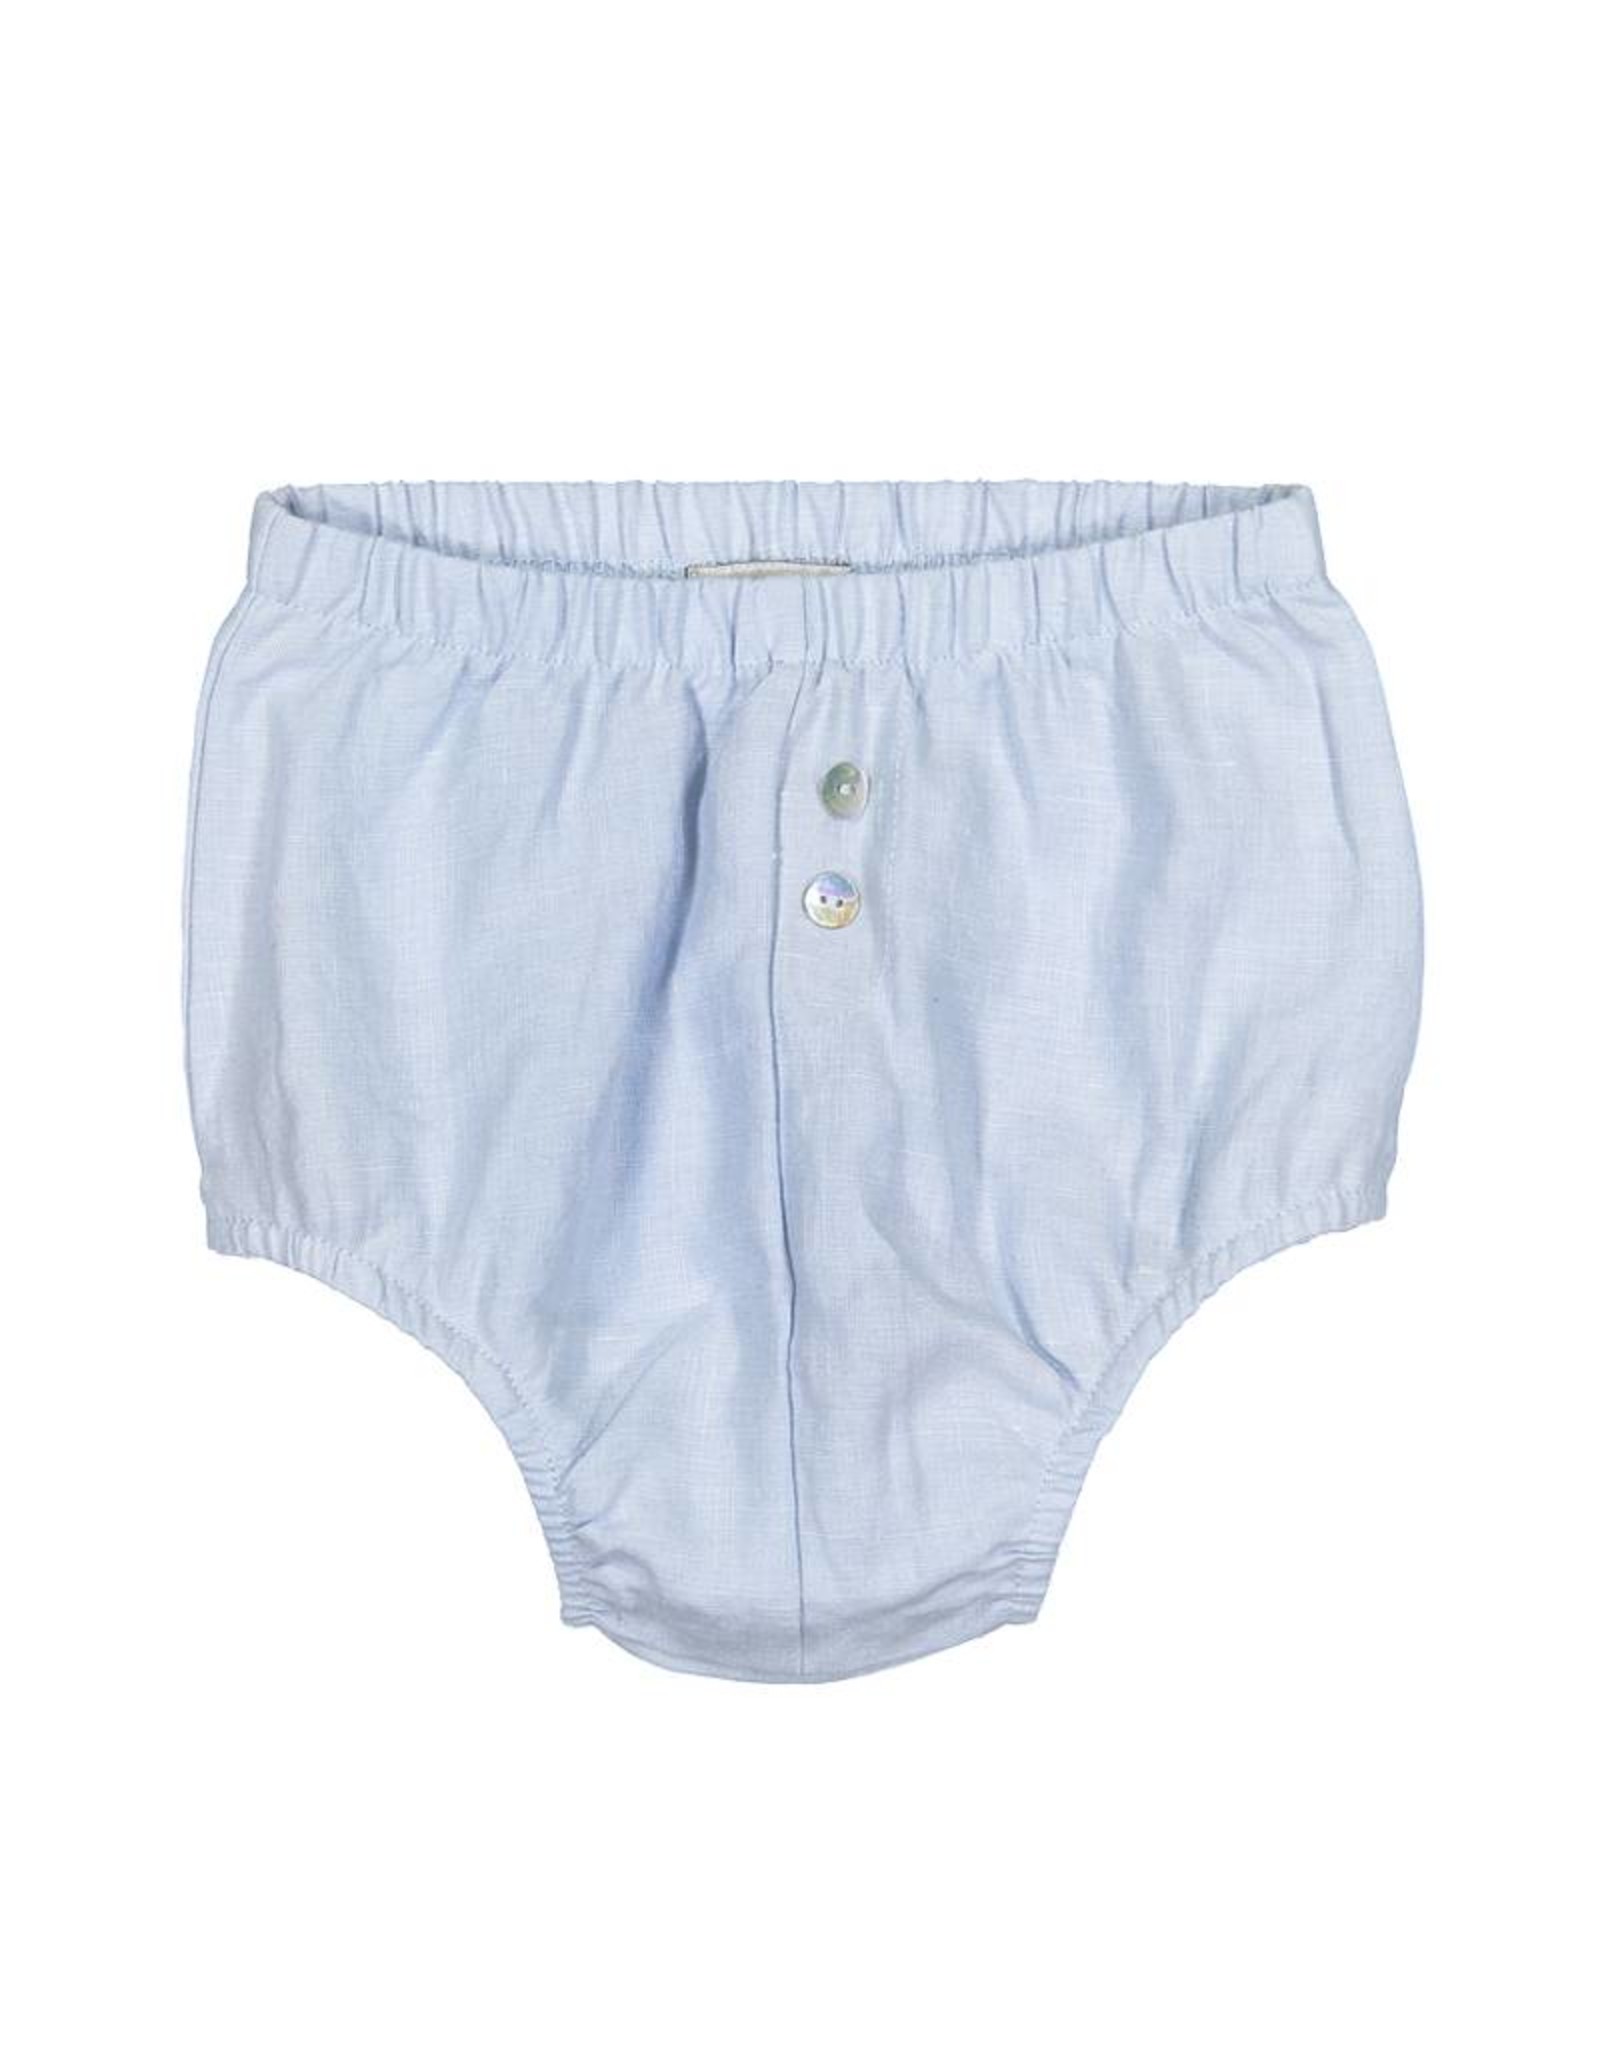 Analogie by Lil Legs Boys Girls Unisex Baby/Toddler Linen Bloomers 